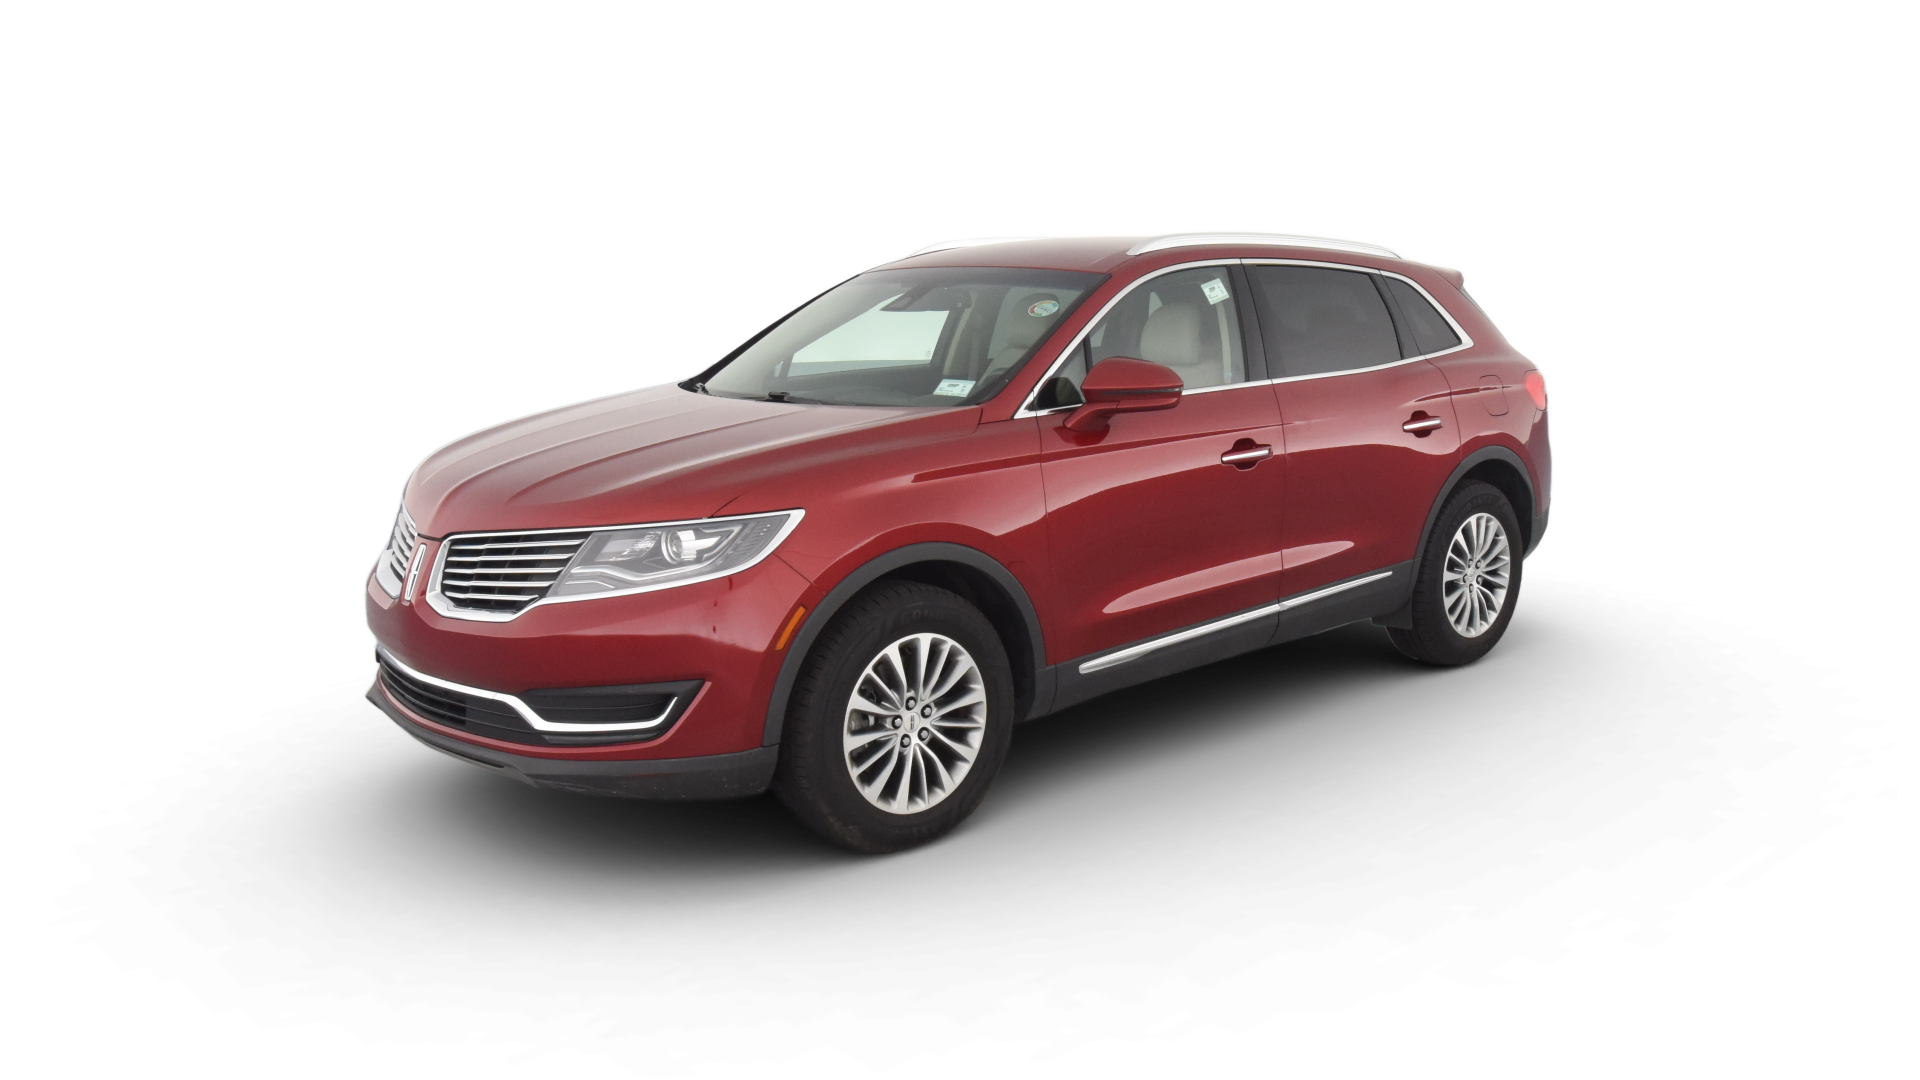 Used 2017 Lincoln MKX For Sale Online | Carvana